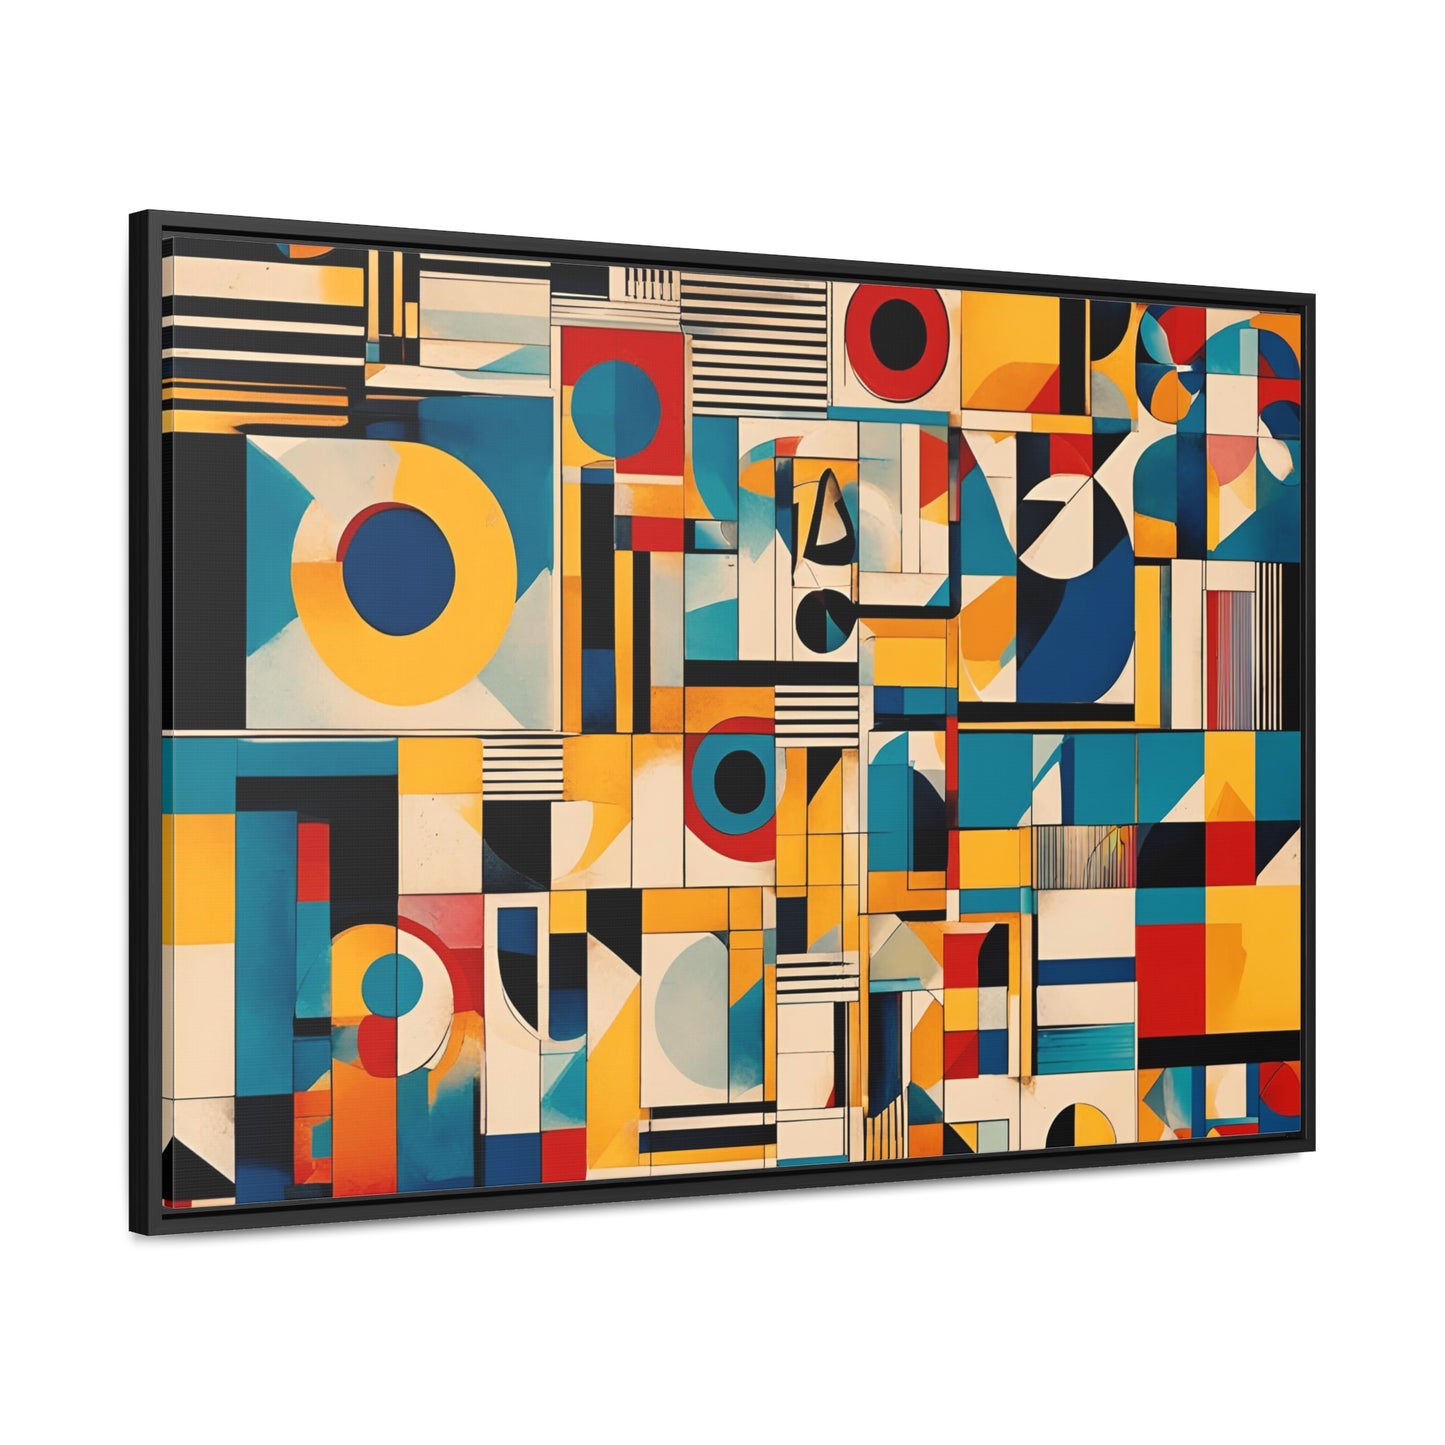 Bold Mid Century Modern Wall Art Print on Canvas in a Floating Frame side view